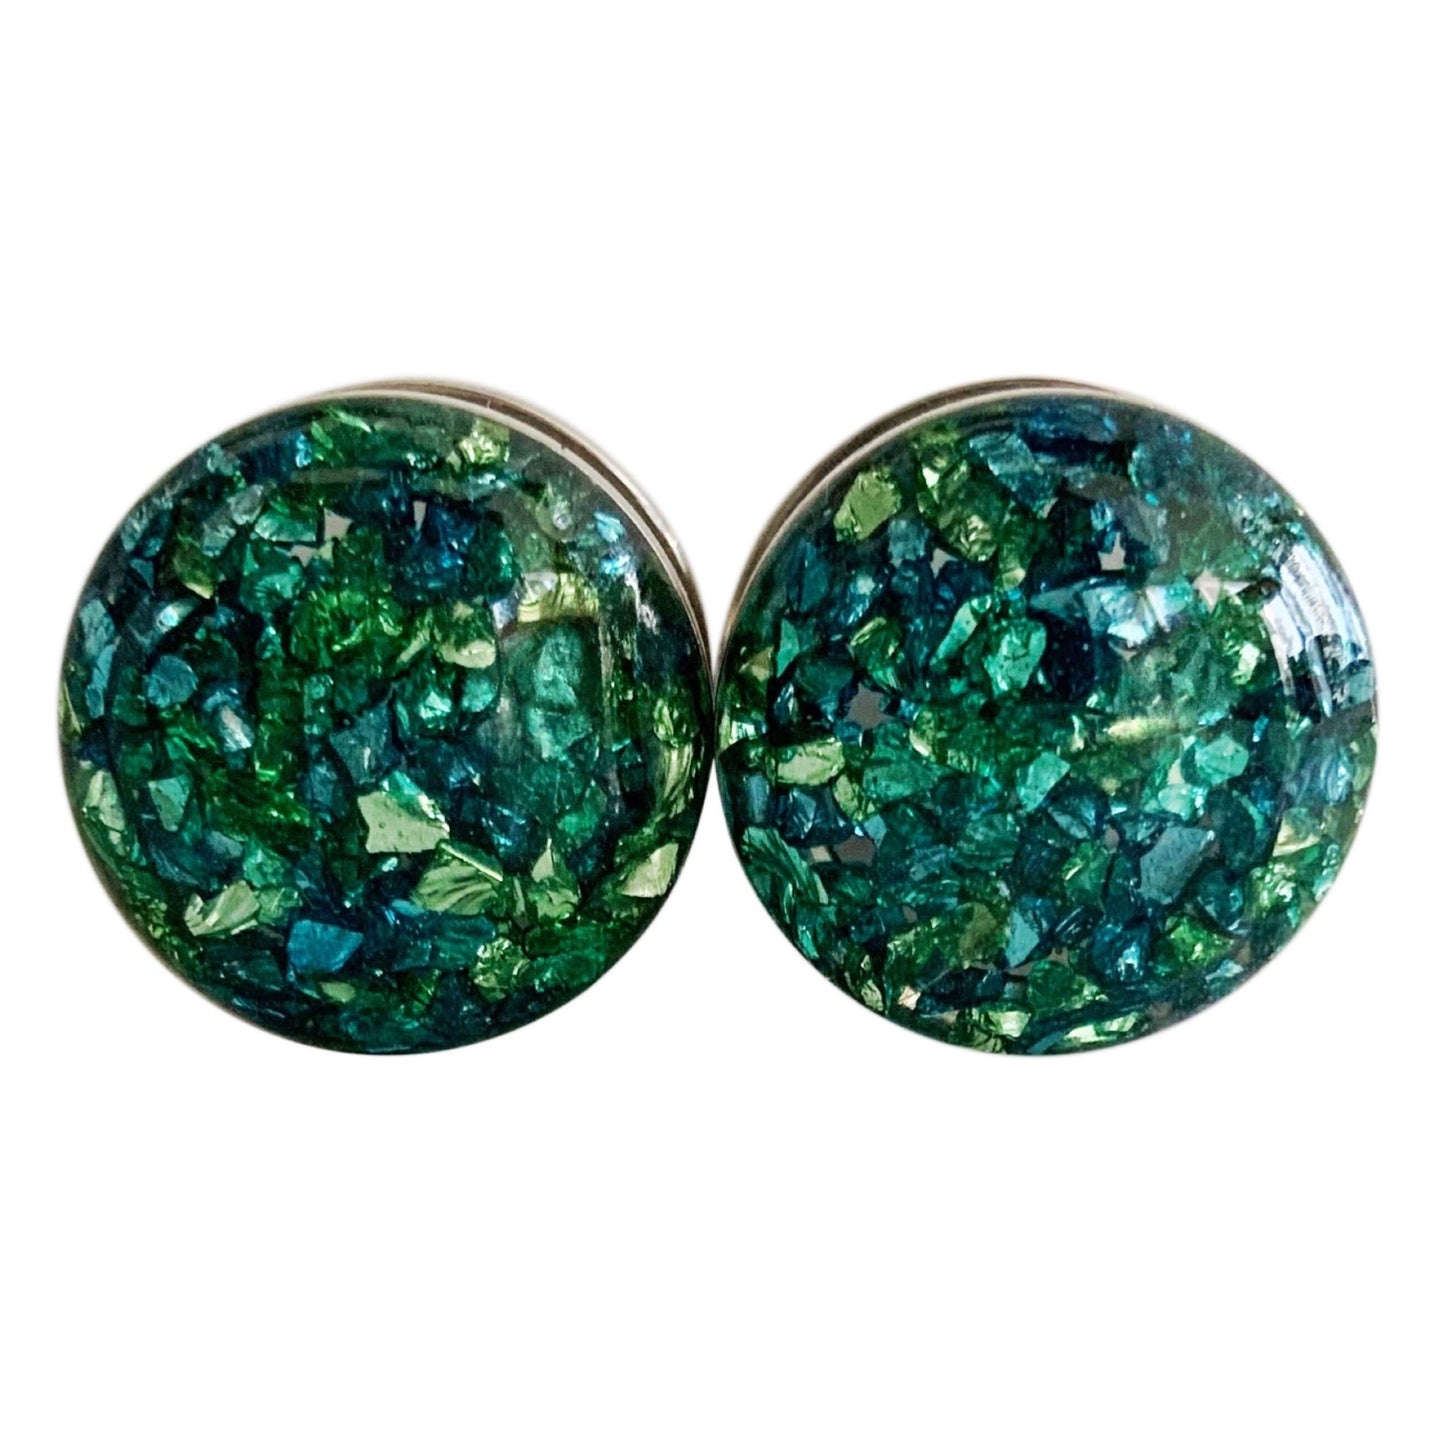 Sea Blue and Green Crushed Glass Plugs